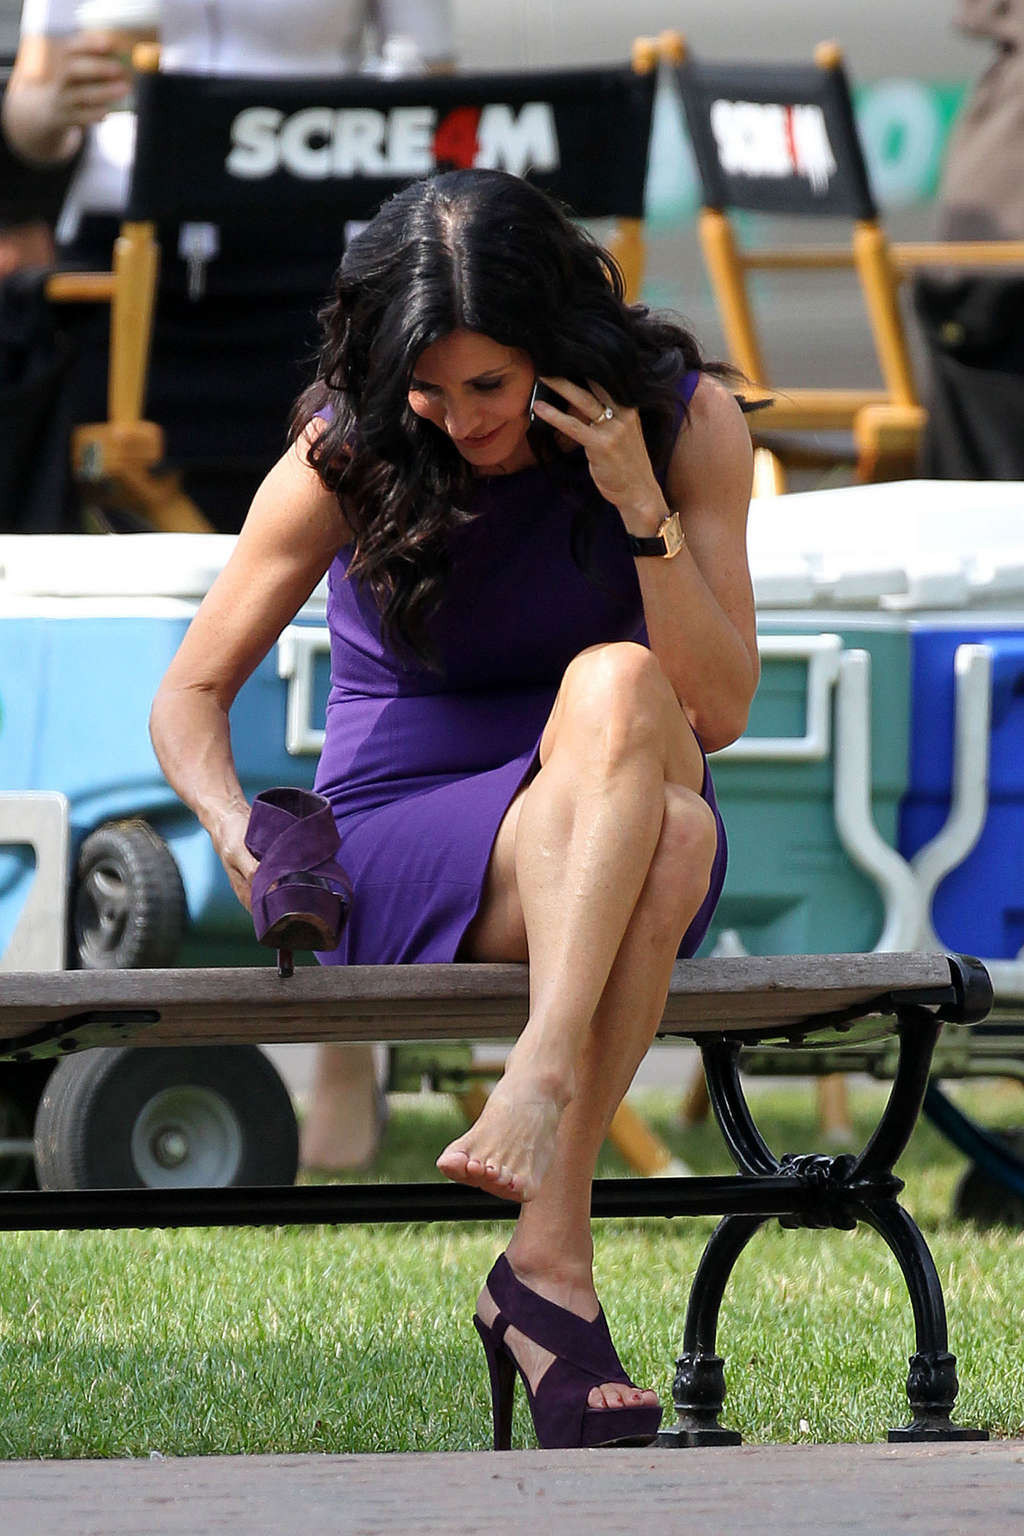 Courteney Cox flashing her panties and show great body in tight dress #75339437